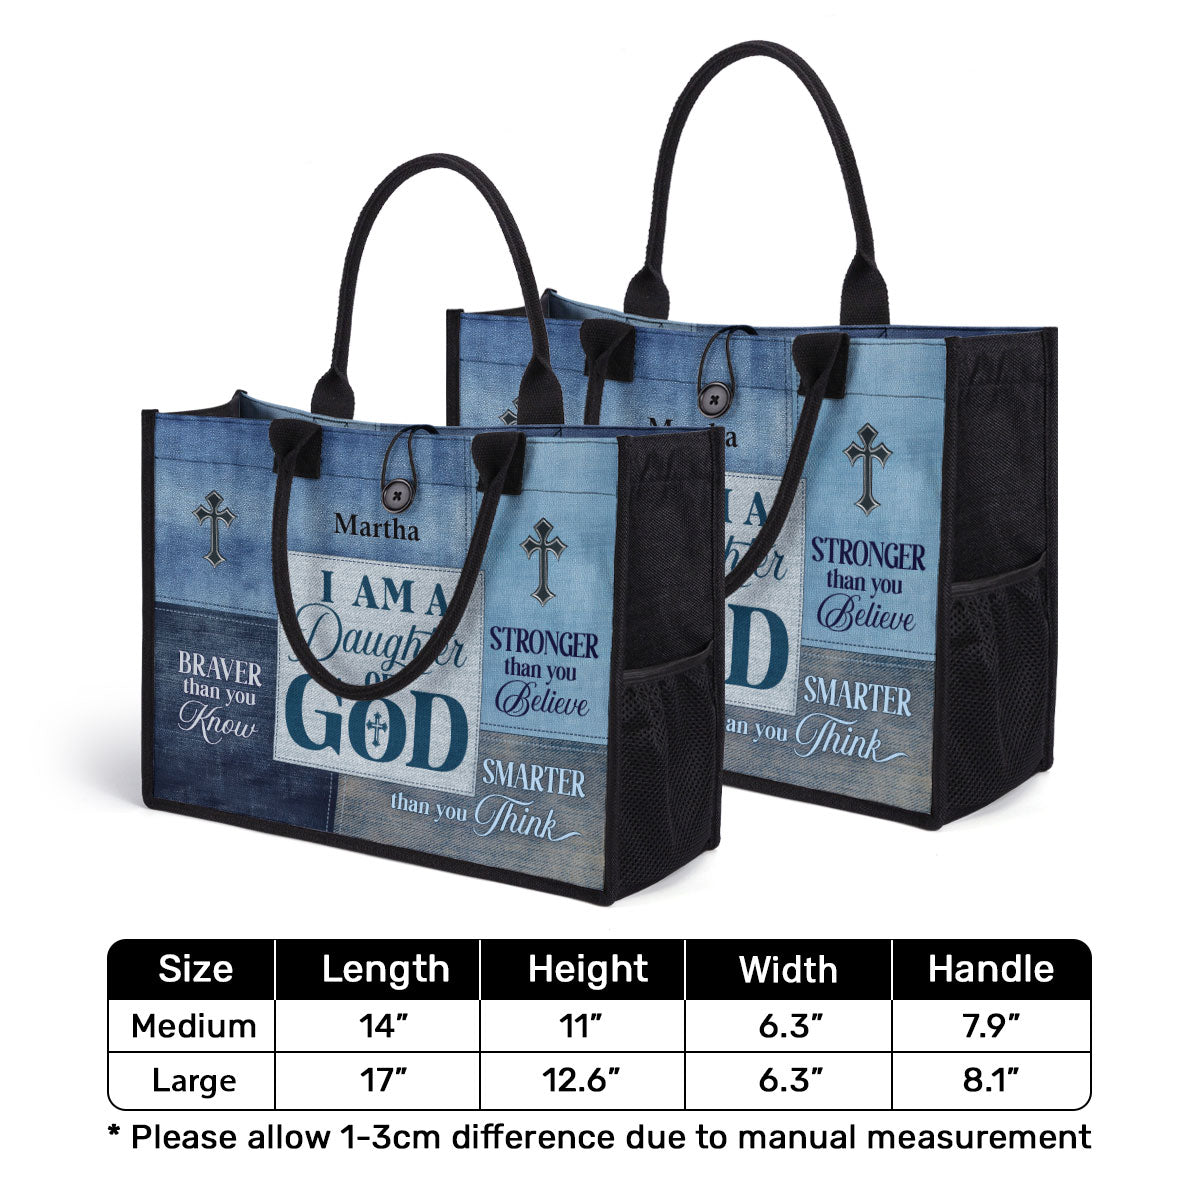 Daughter Of God - Personalized New Canvas Tote Bag CTBM764